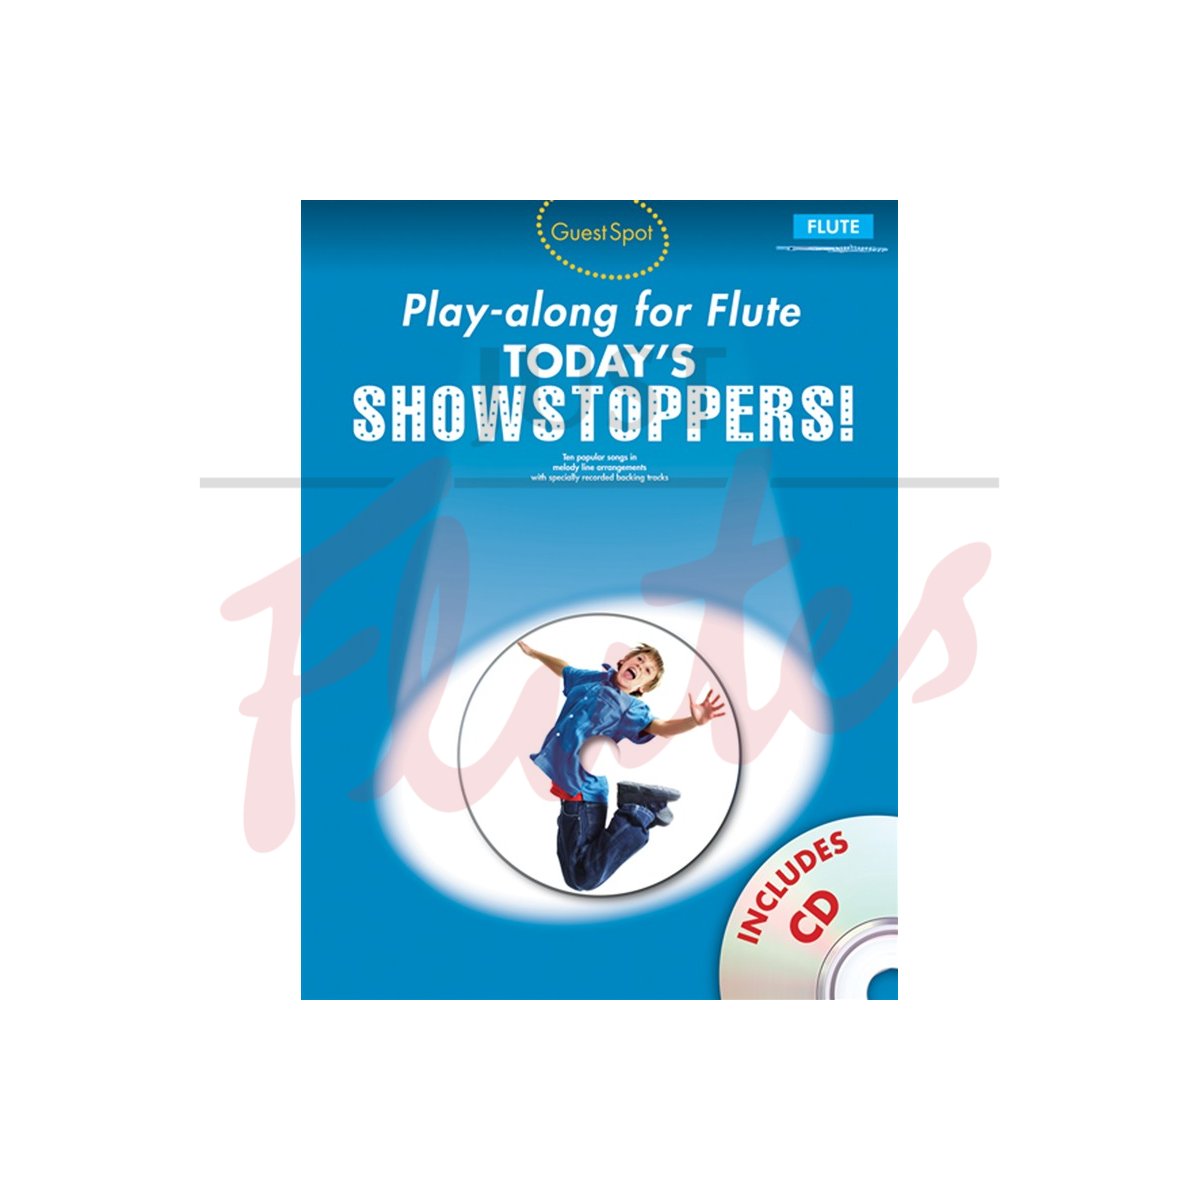 Guest Spot - Today's Showstoppers! [Flute]